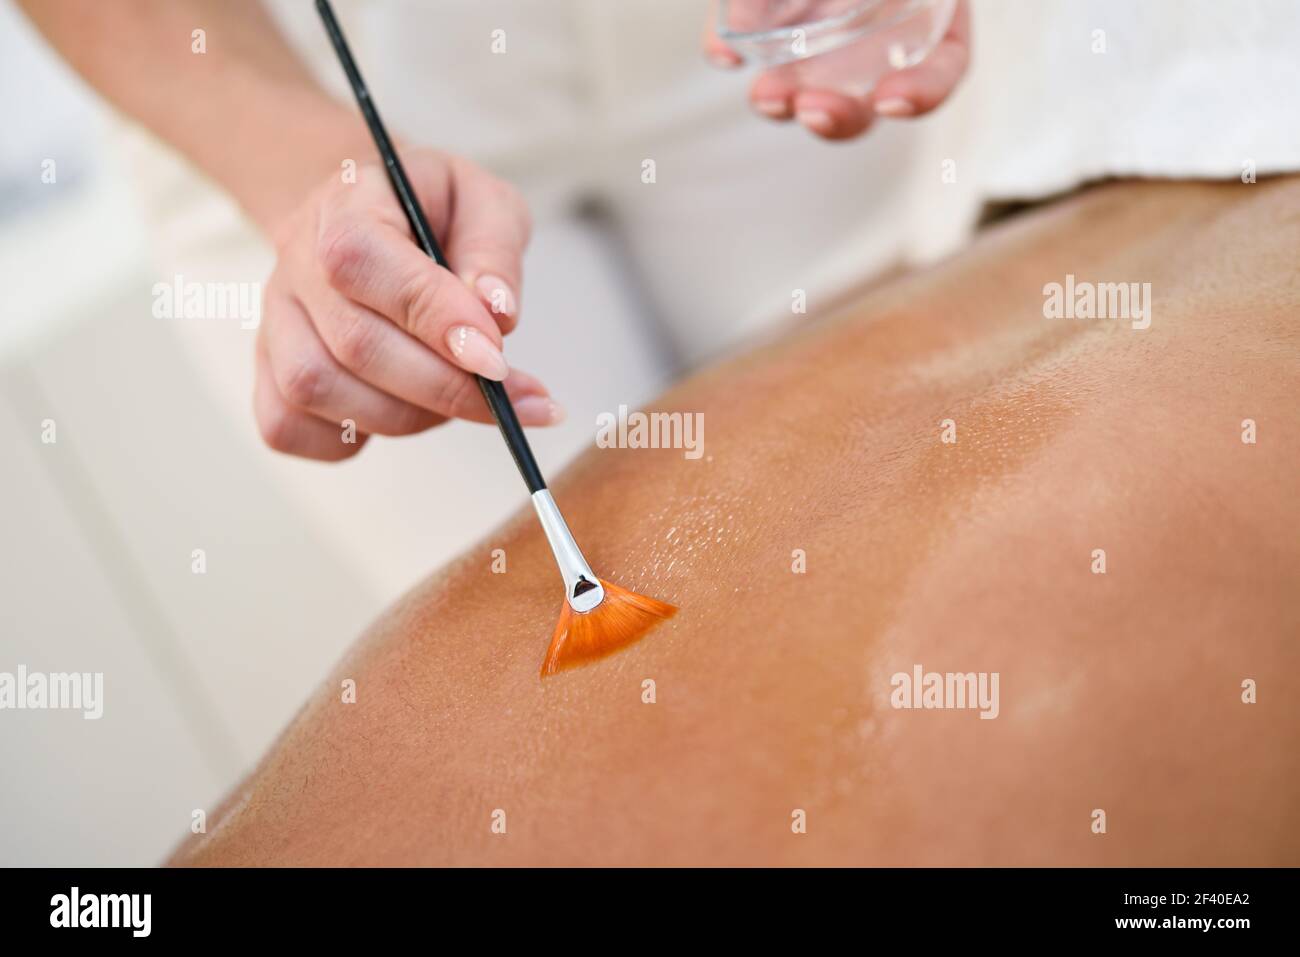 Woman receiving back massage treatment with oil brush in spa wellness center. Beauty and Aesthetic concepts. Stock Photo